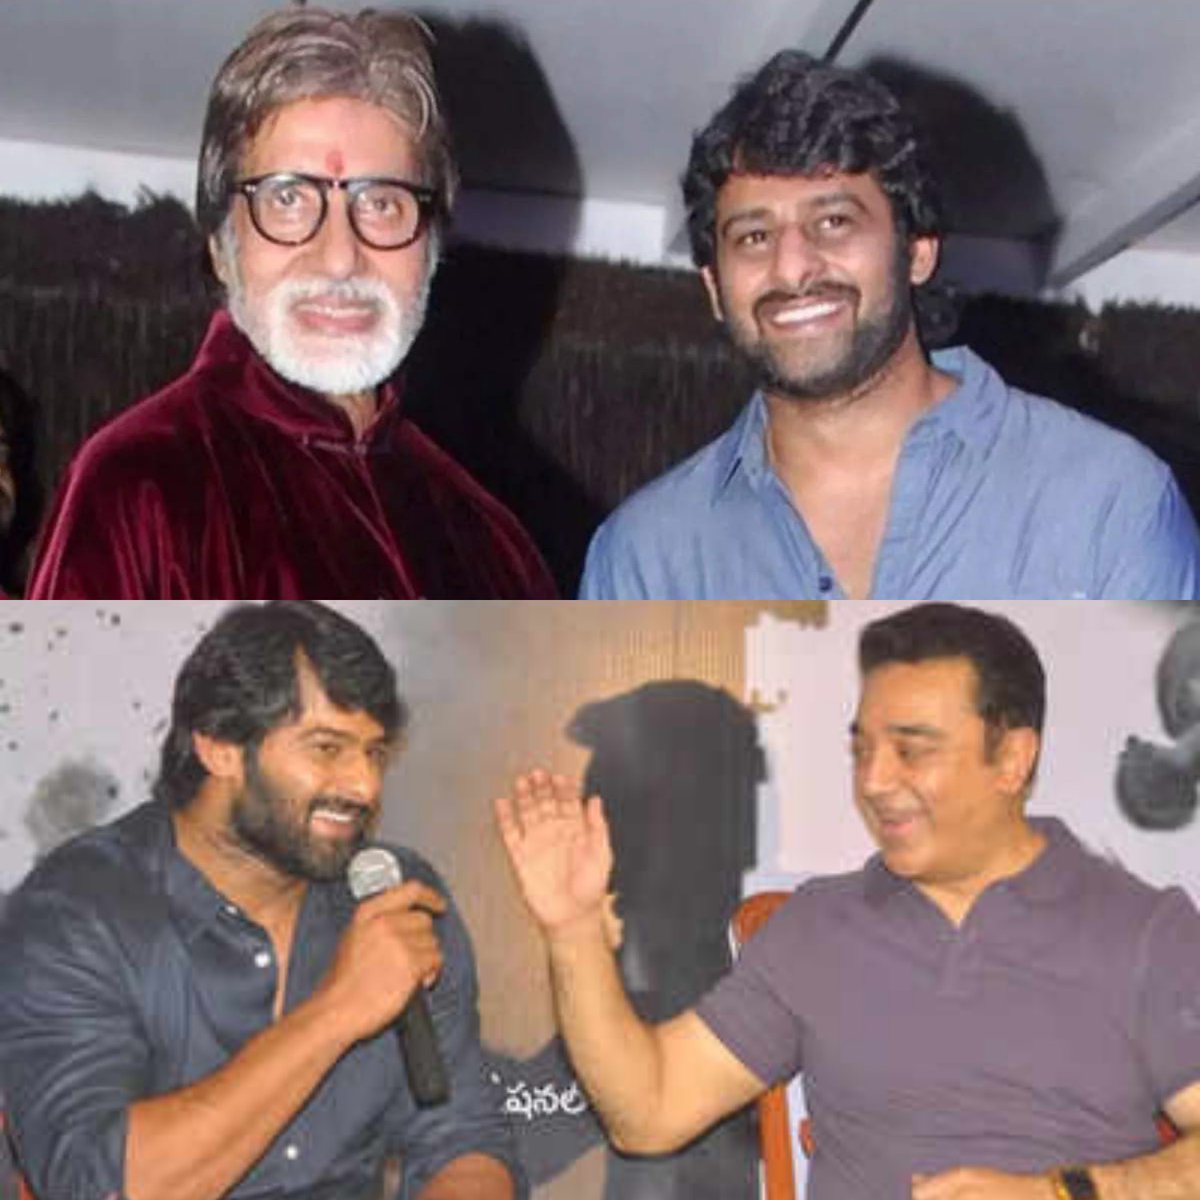 2011: Attended Amitabh film's premiere 
2013: Stood in support of Kamal's Vishwaroopam release.

From FanBoy to BigB
From Introducing himself as Prabhas to KamalHassan

2023: BigB n Kamal doing key roles in #Prabhas 's #ProjectK